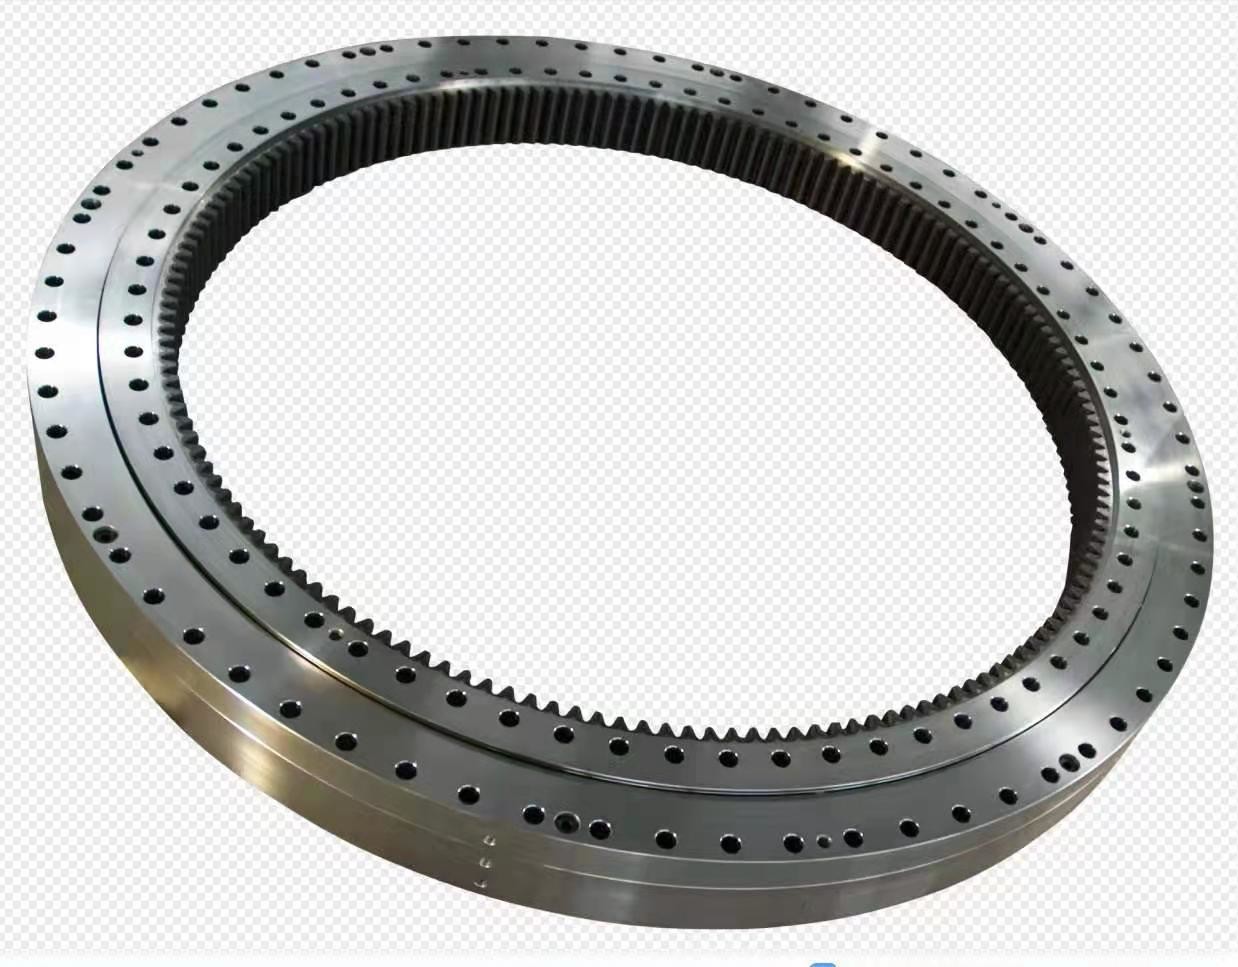 China TEM Excavator Slew Ring For JCB JS200LC JS210 JS220 Swing Turntable Bearing Circle JRB0017 for sale